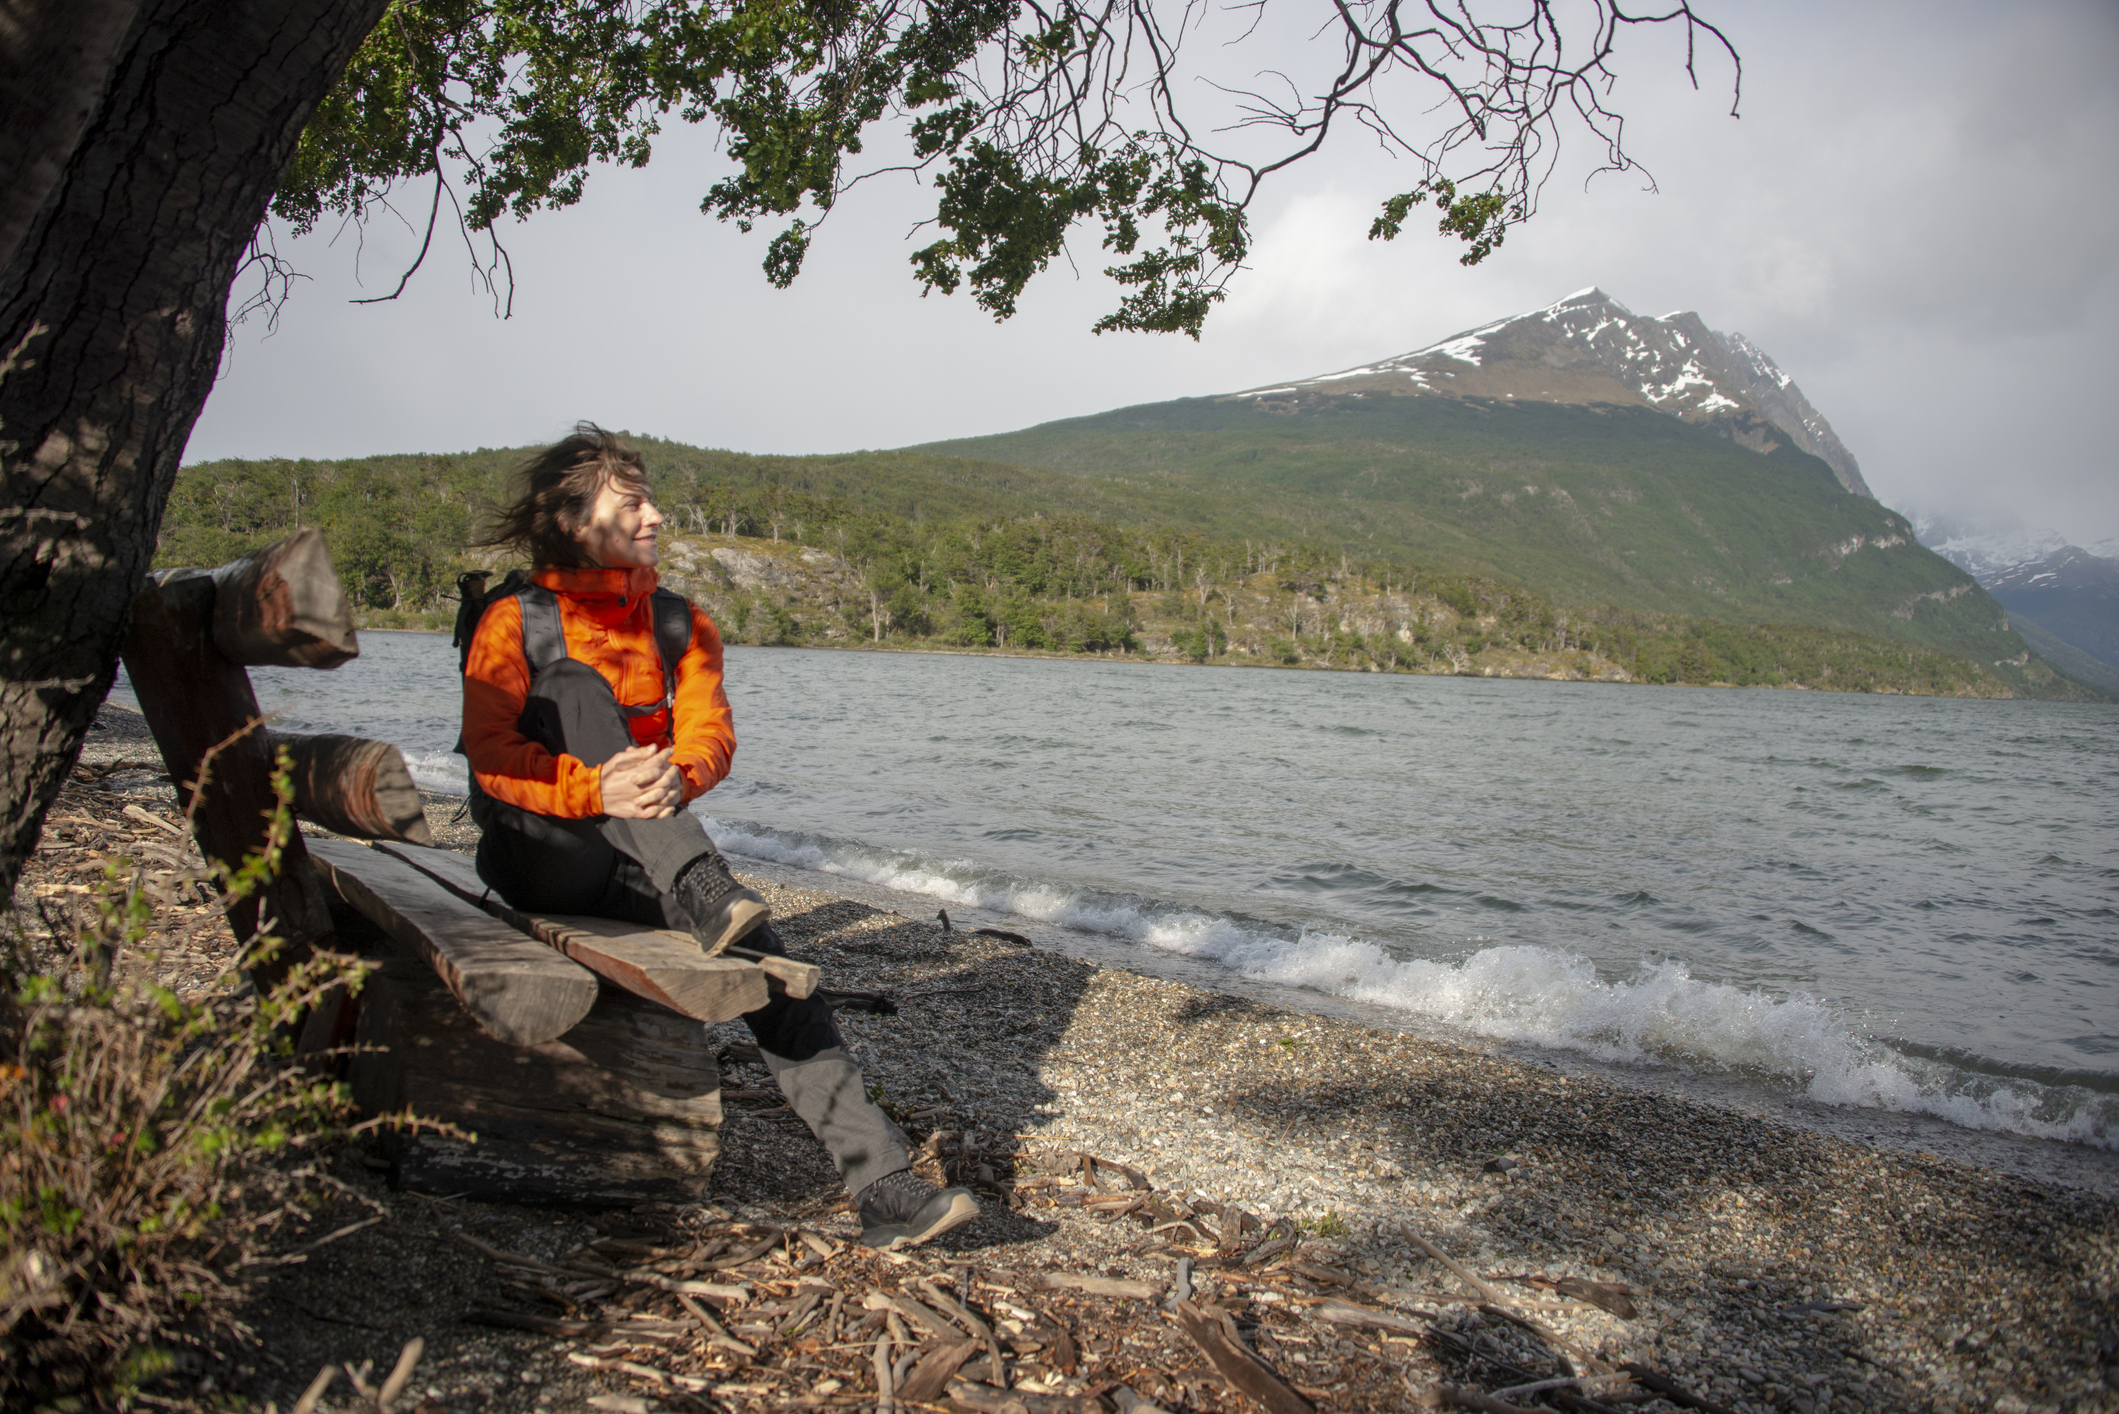 A female hiker rests on the bench on the shore of Lake Acigami